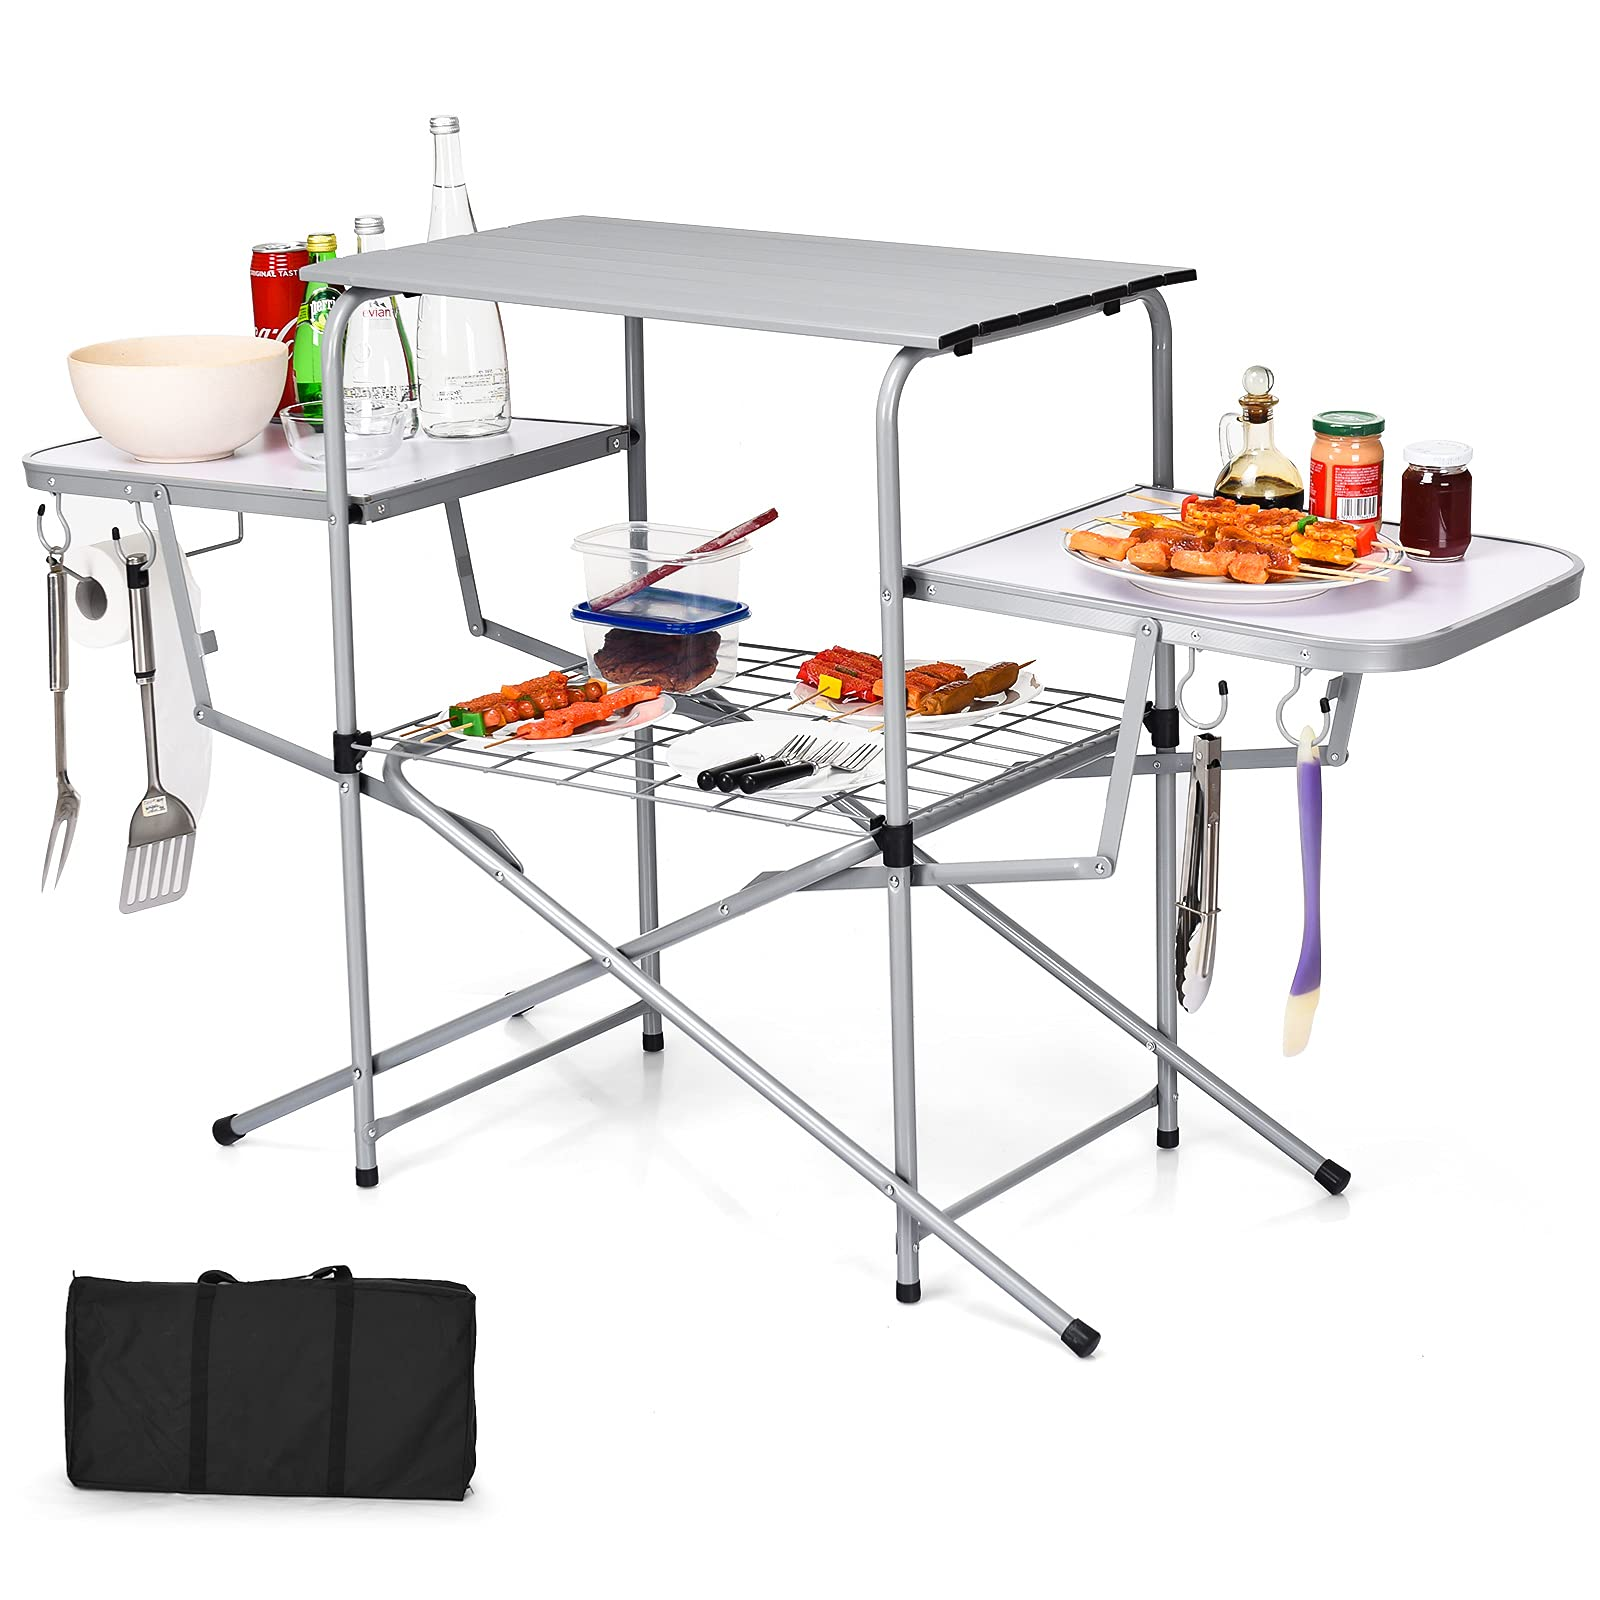 Giantex Folding Grill Table with 26'' Main Tabletop, Portable Aluminum Camping Table